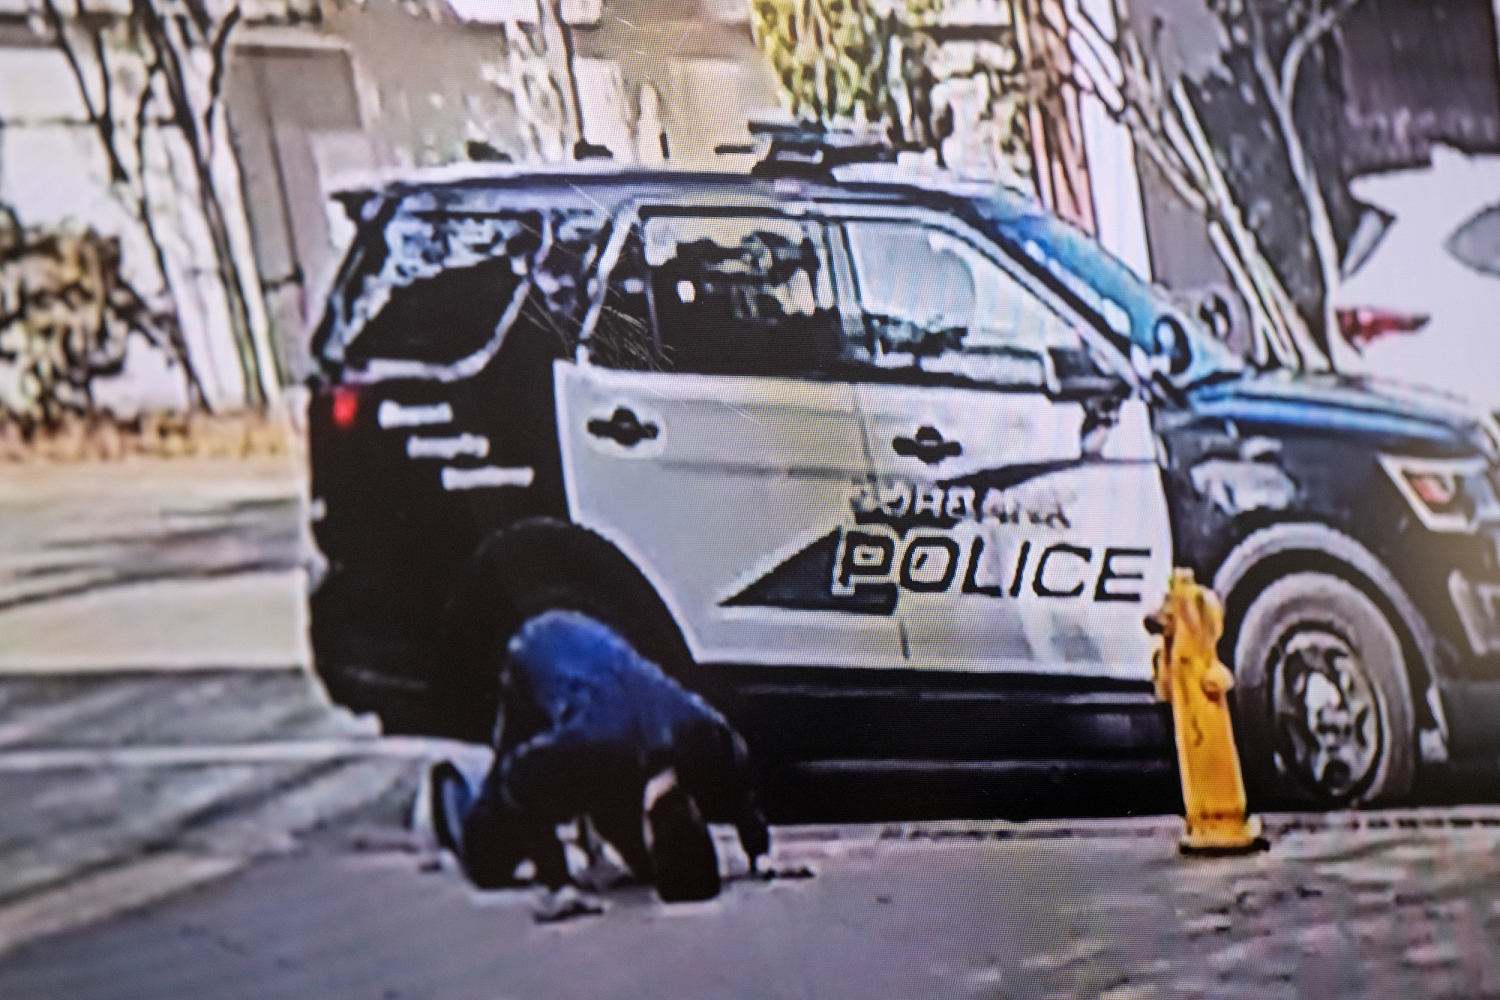 Video appears to show Burbank police dumping distressed homeless man in Los Angeles